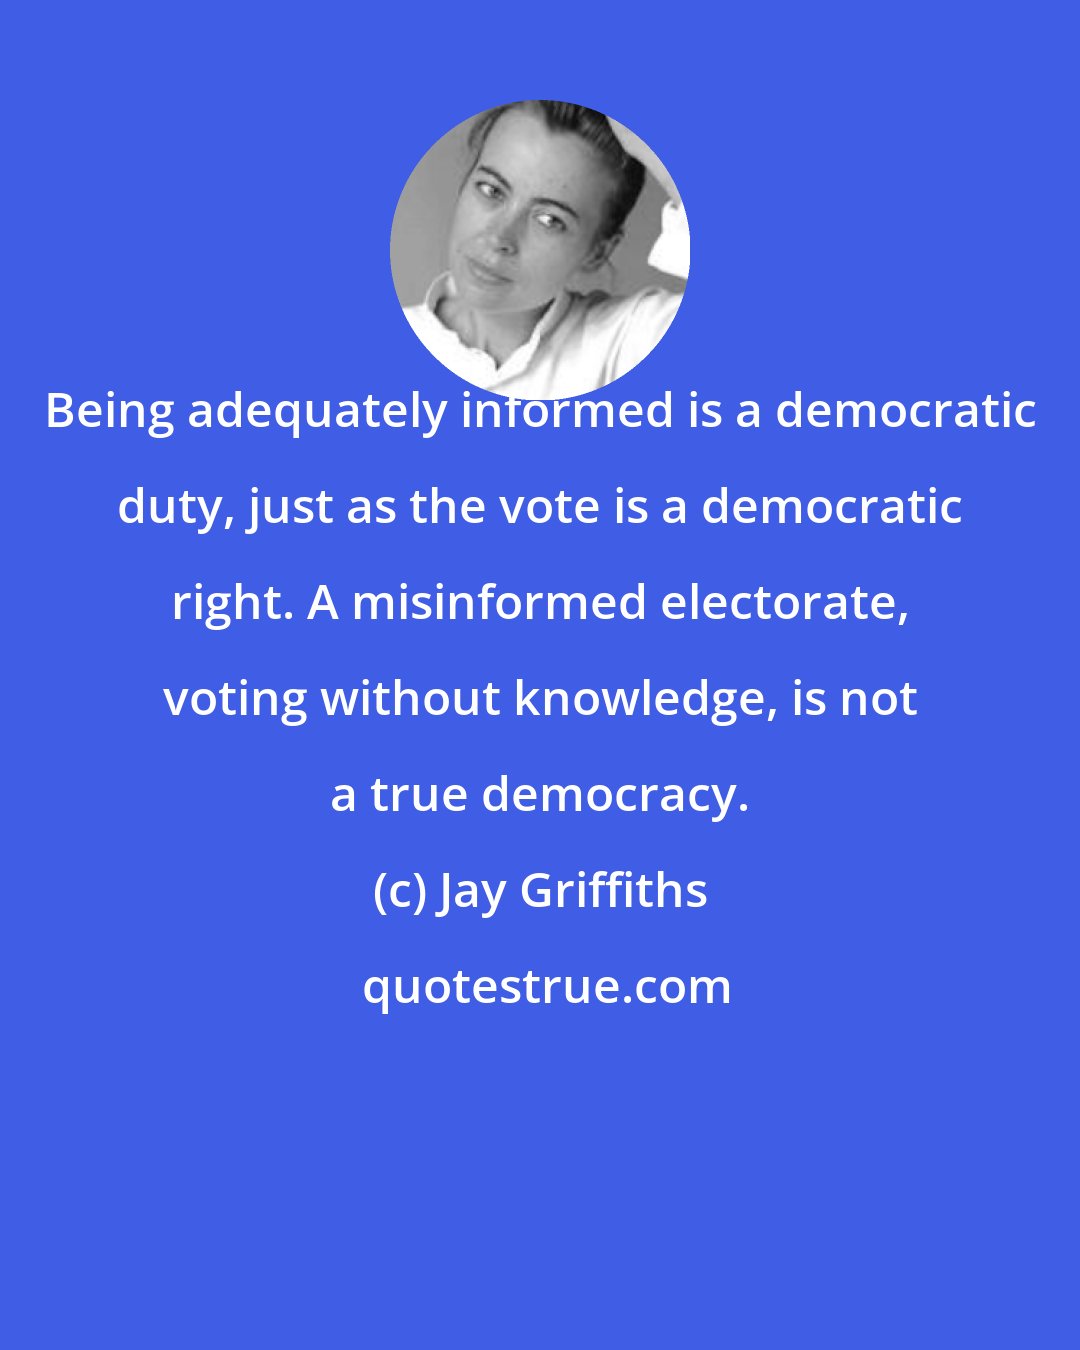 Jay Griffiths: Being adequately informed is a democratic duty, just as the vote is a democratic right. A misinformed electorate, voting without knowledge, is not a true democracy.